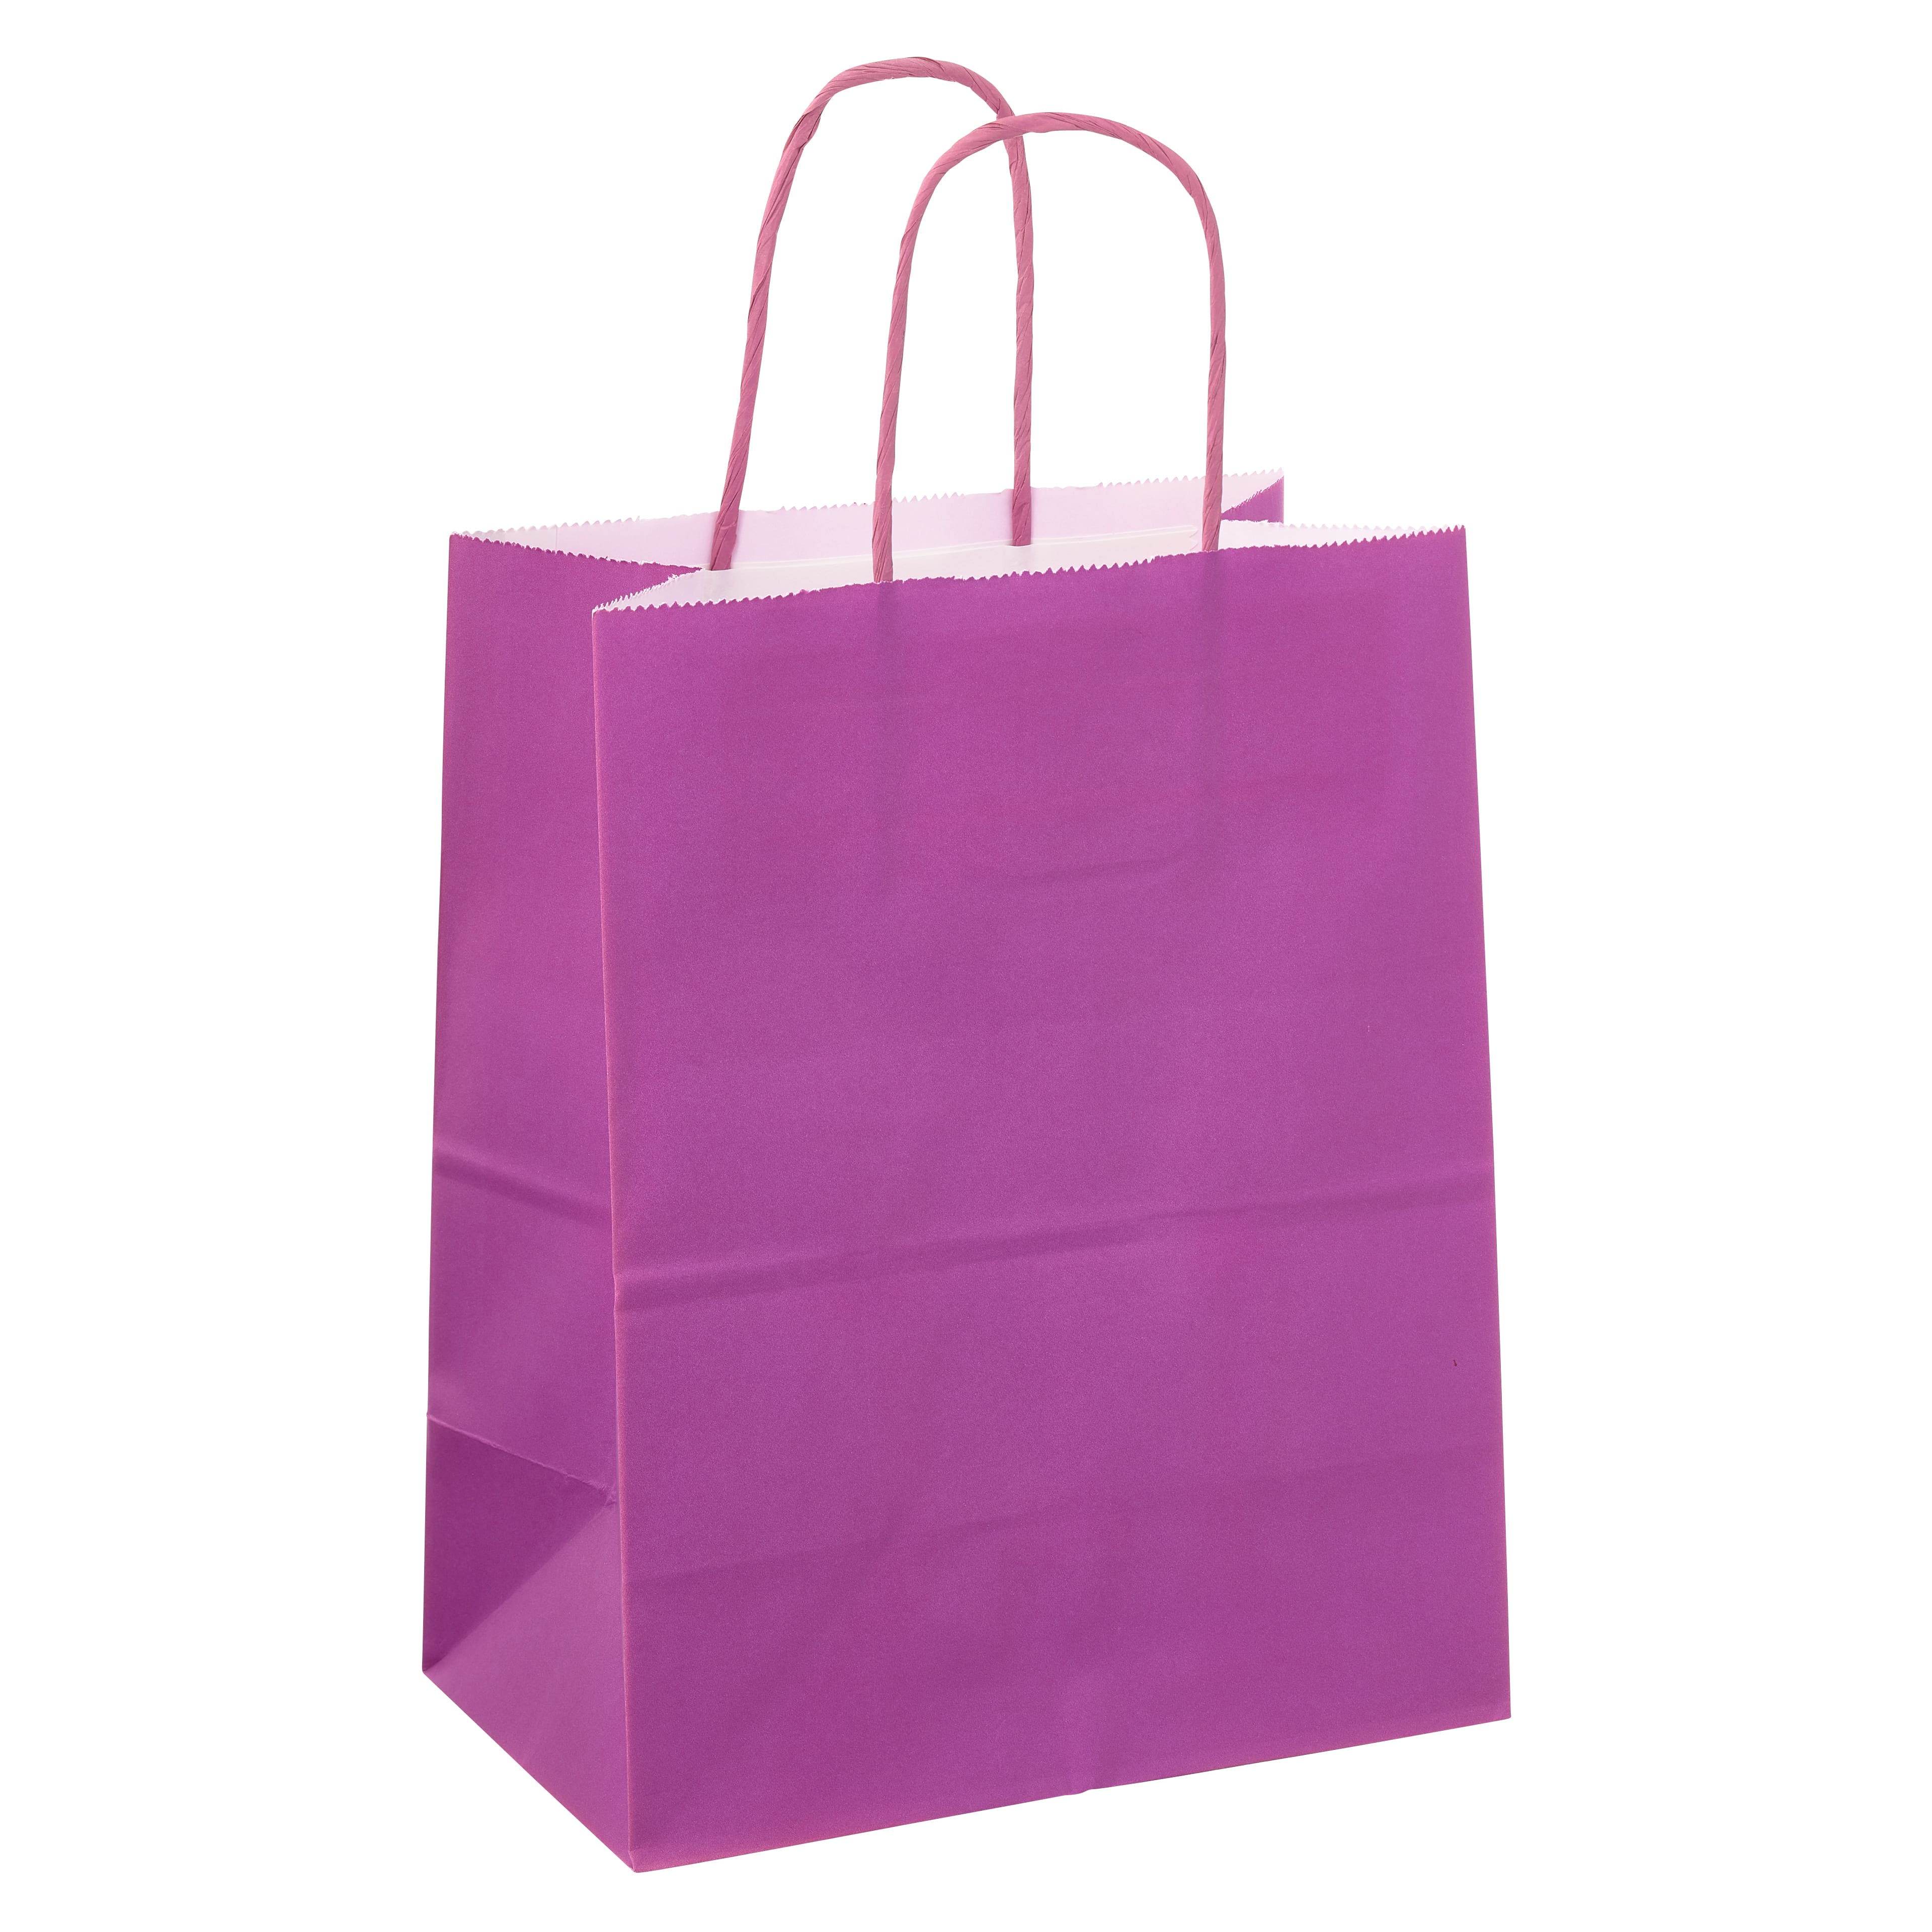 Buy the Small Pink Gift Bag Value Pack By Celebrate It™ at Michaels